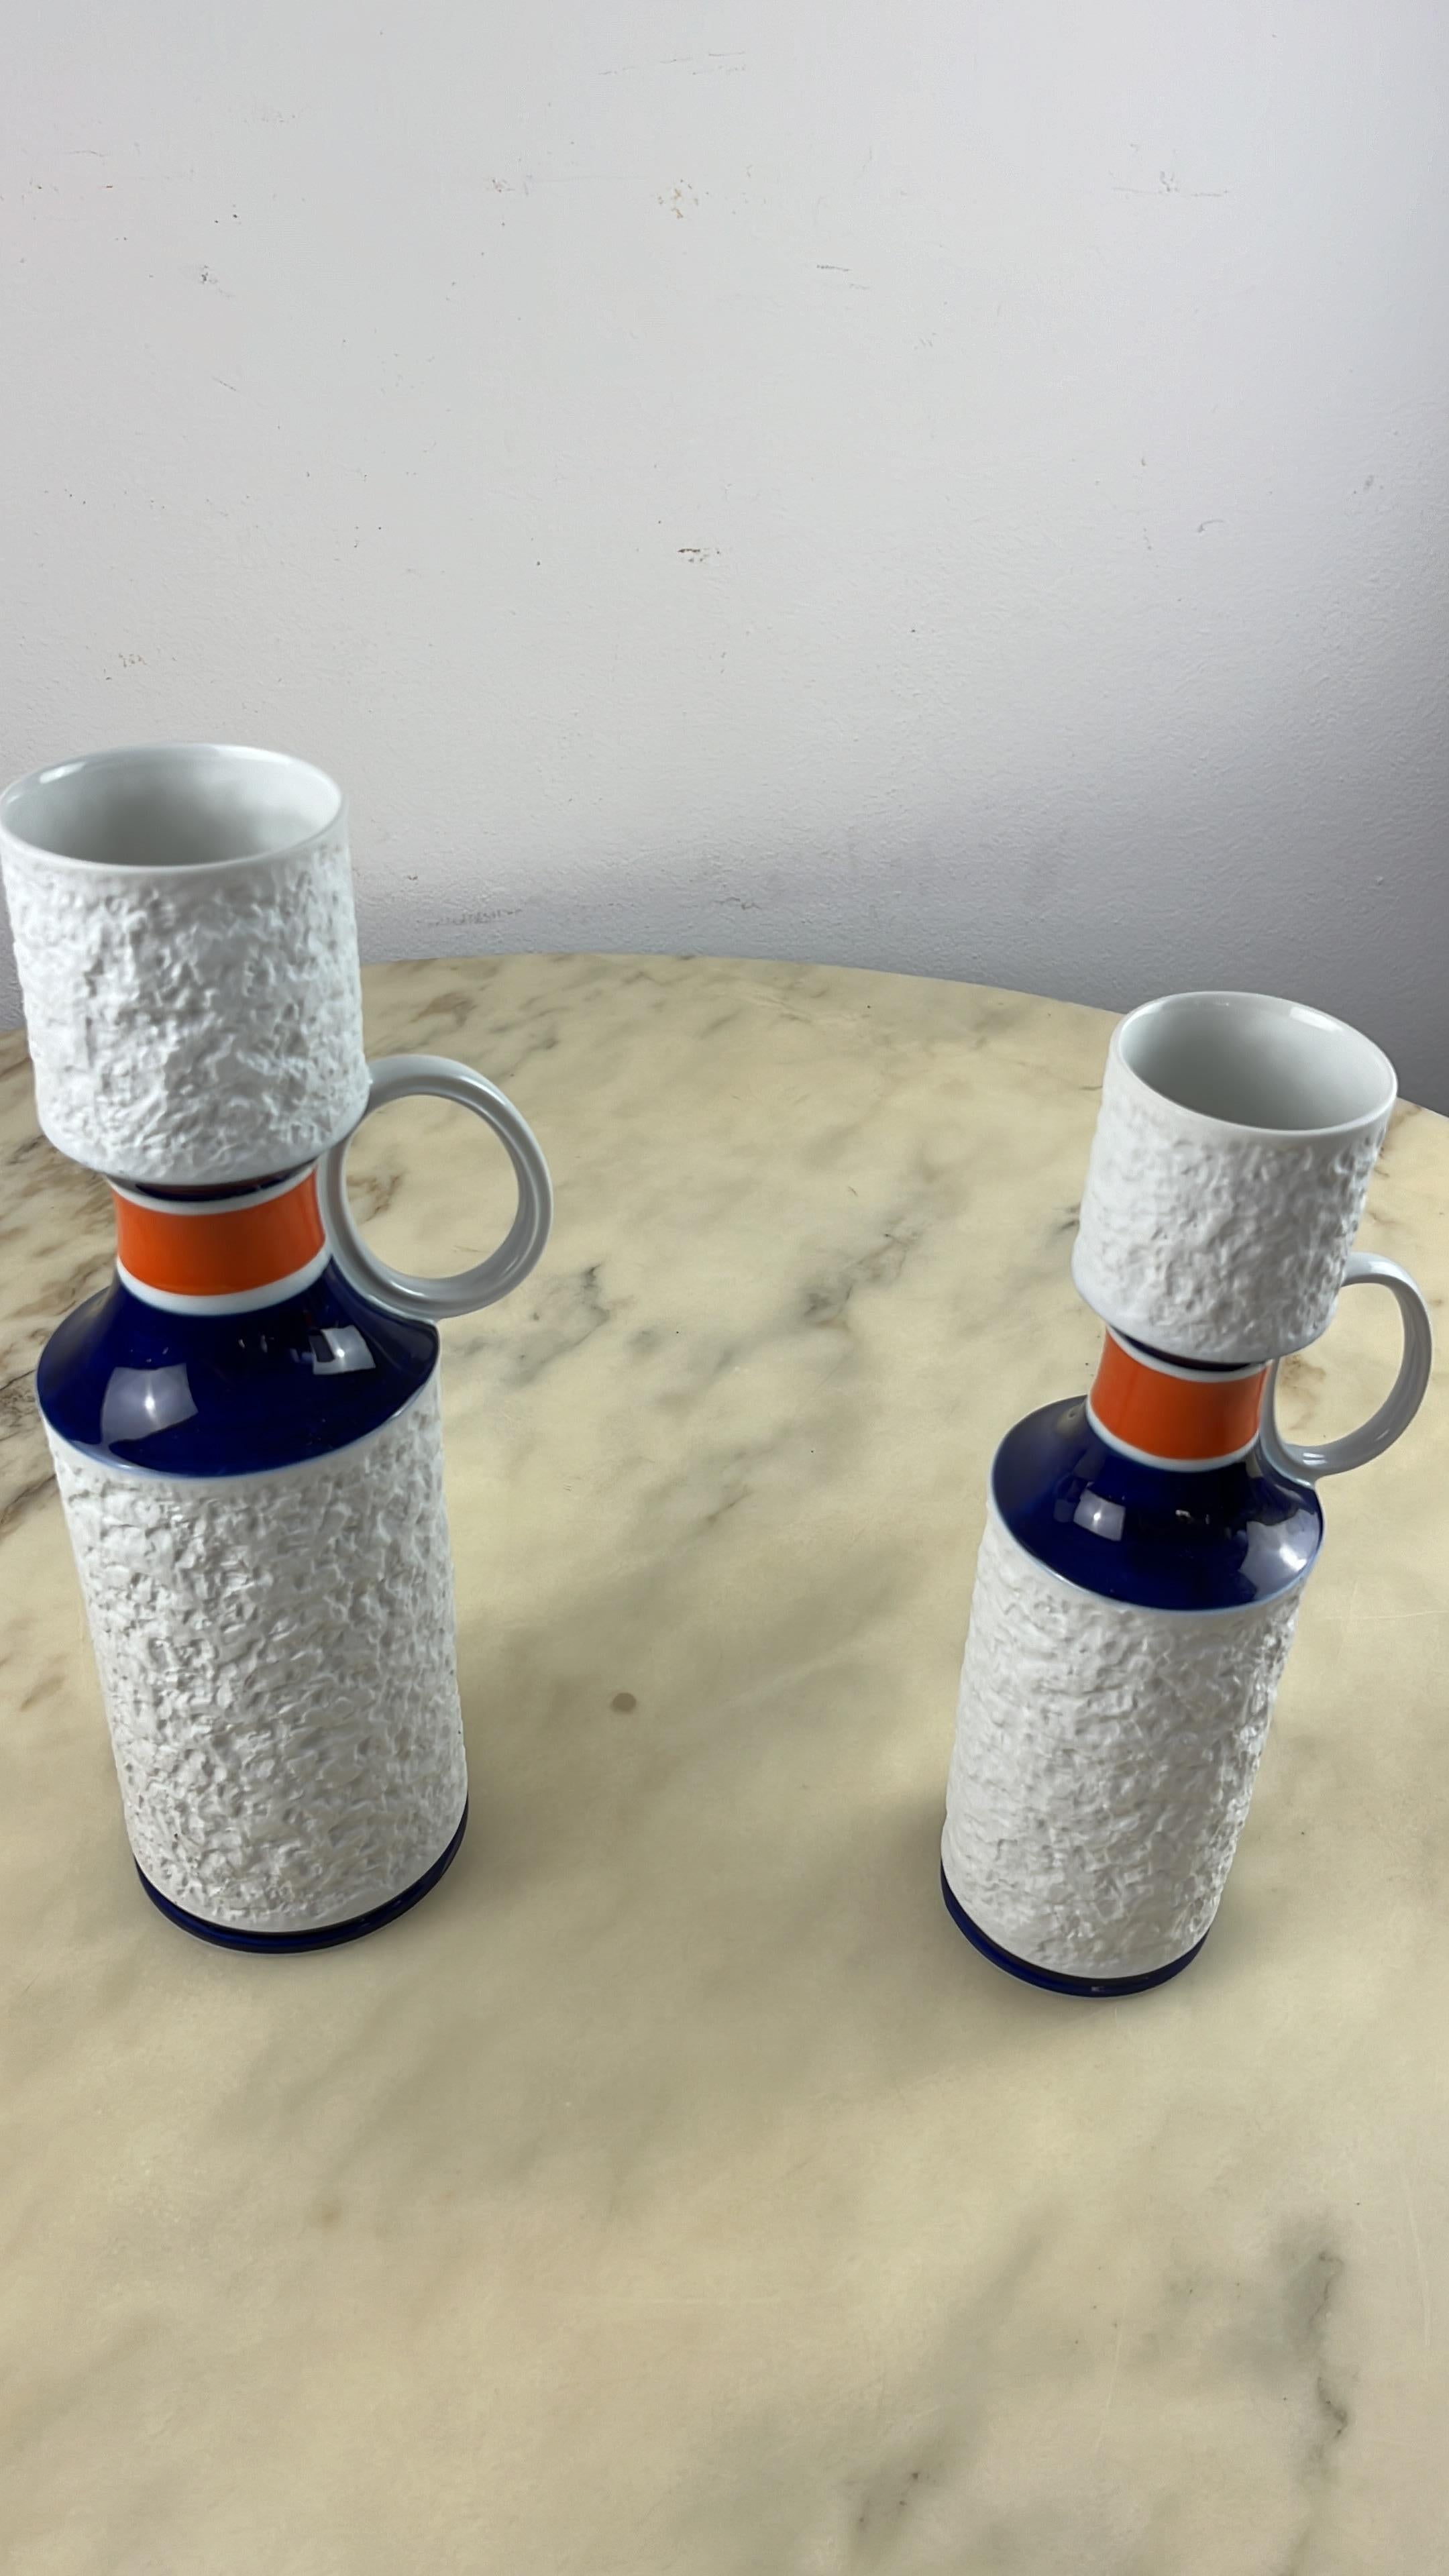 Mid-20th Century Pair of KPM Biscuit Porcelain Vases, Germany, 1960s For Sale